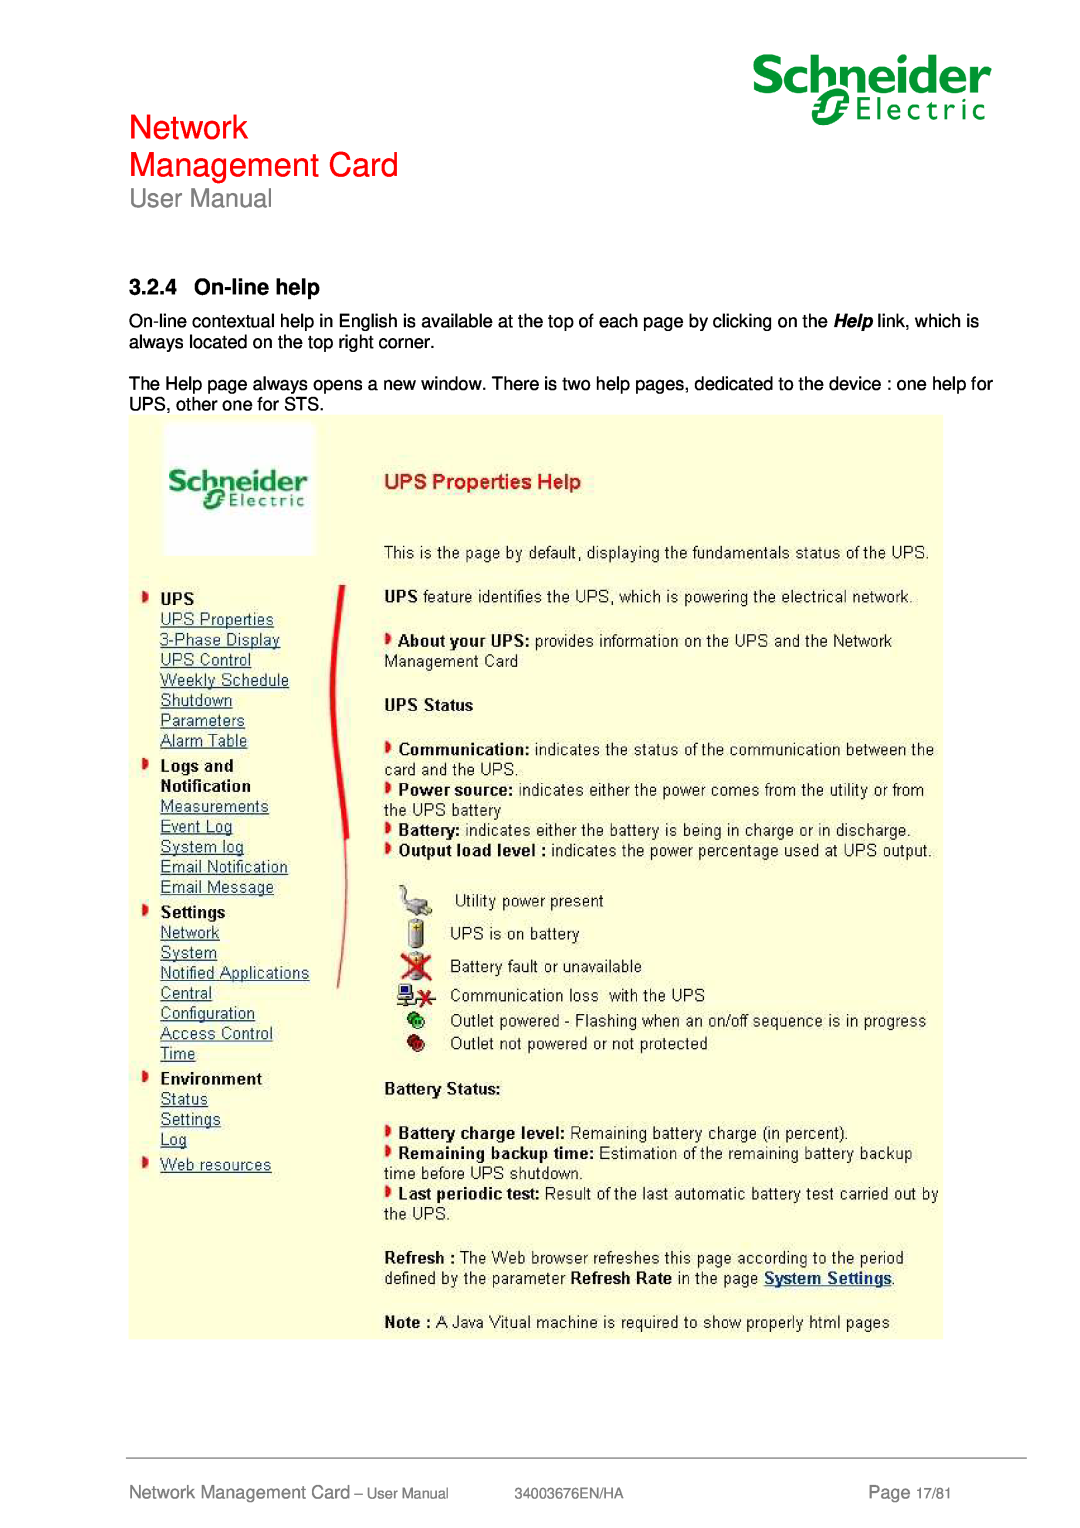 Schneider Electric 66074, 66846 user manual On-line help, Network Management Card - User Manual, Page 17/81 